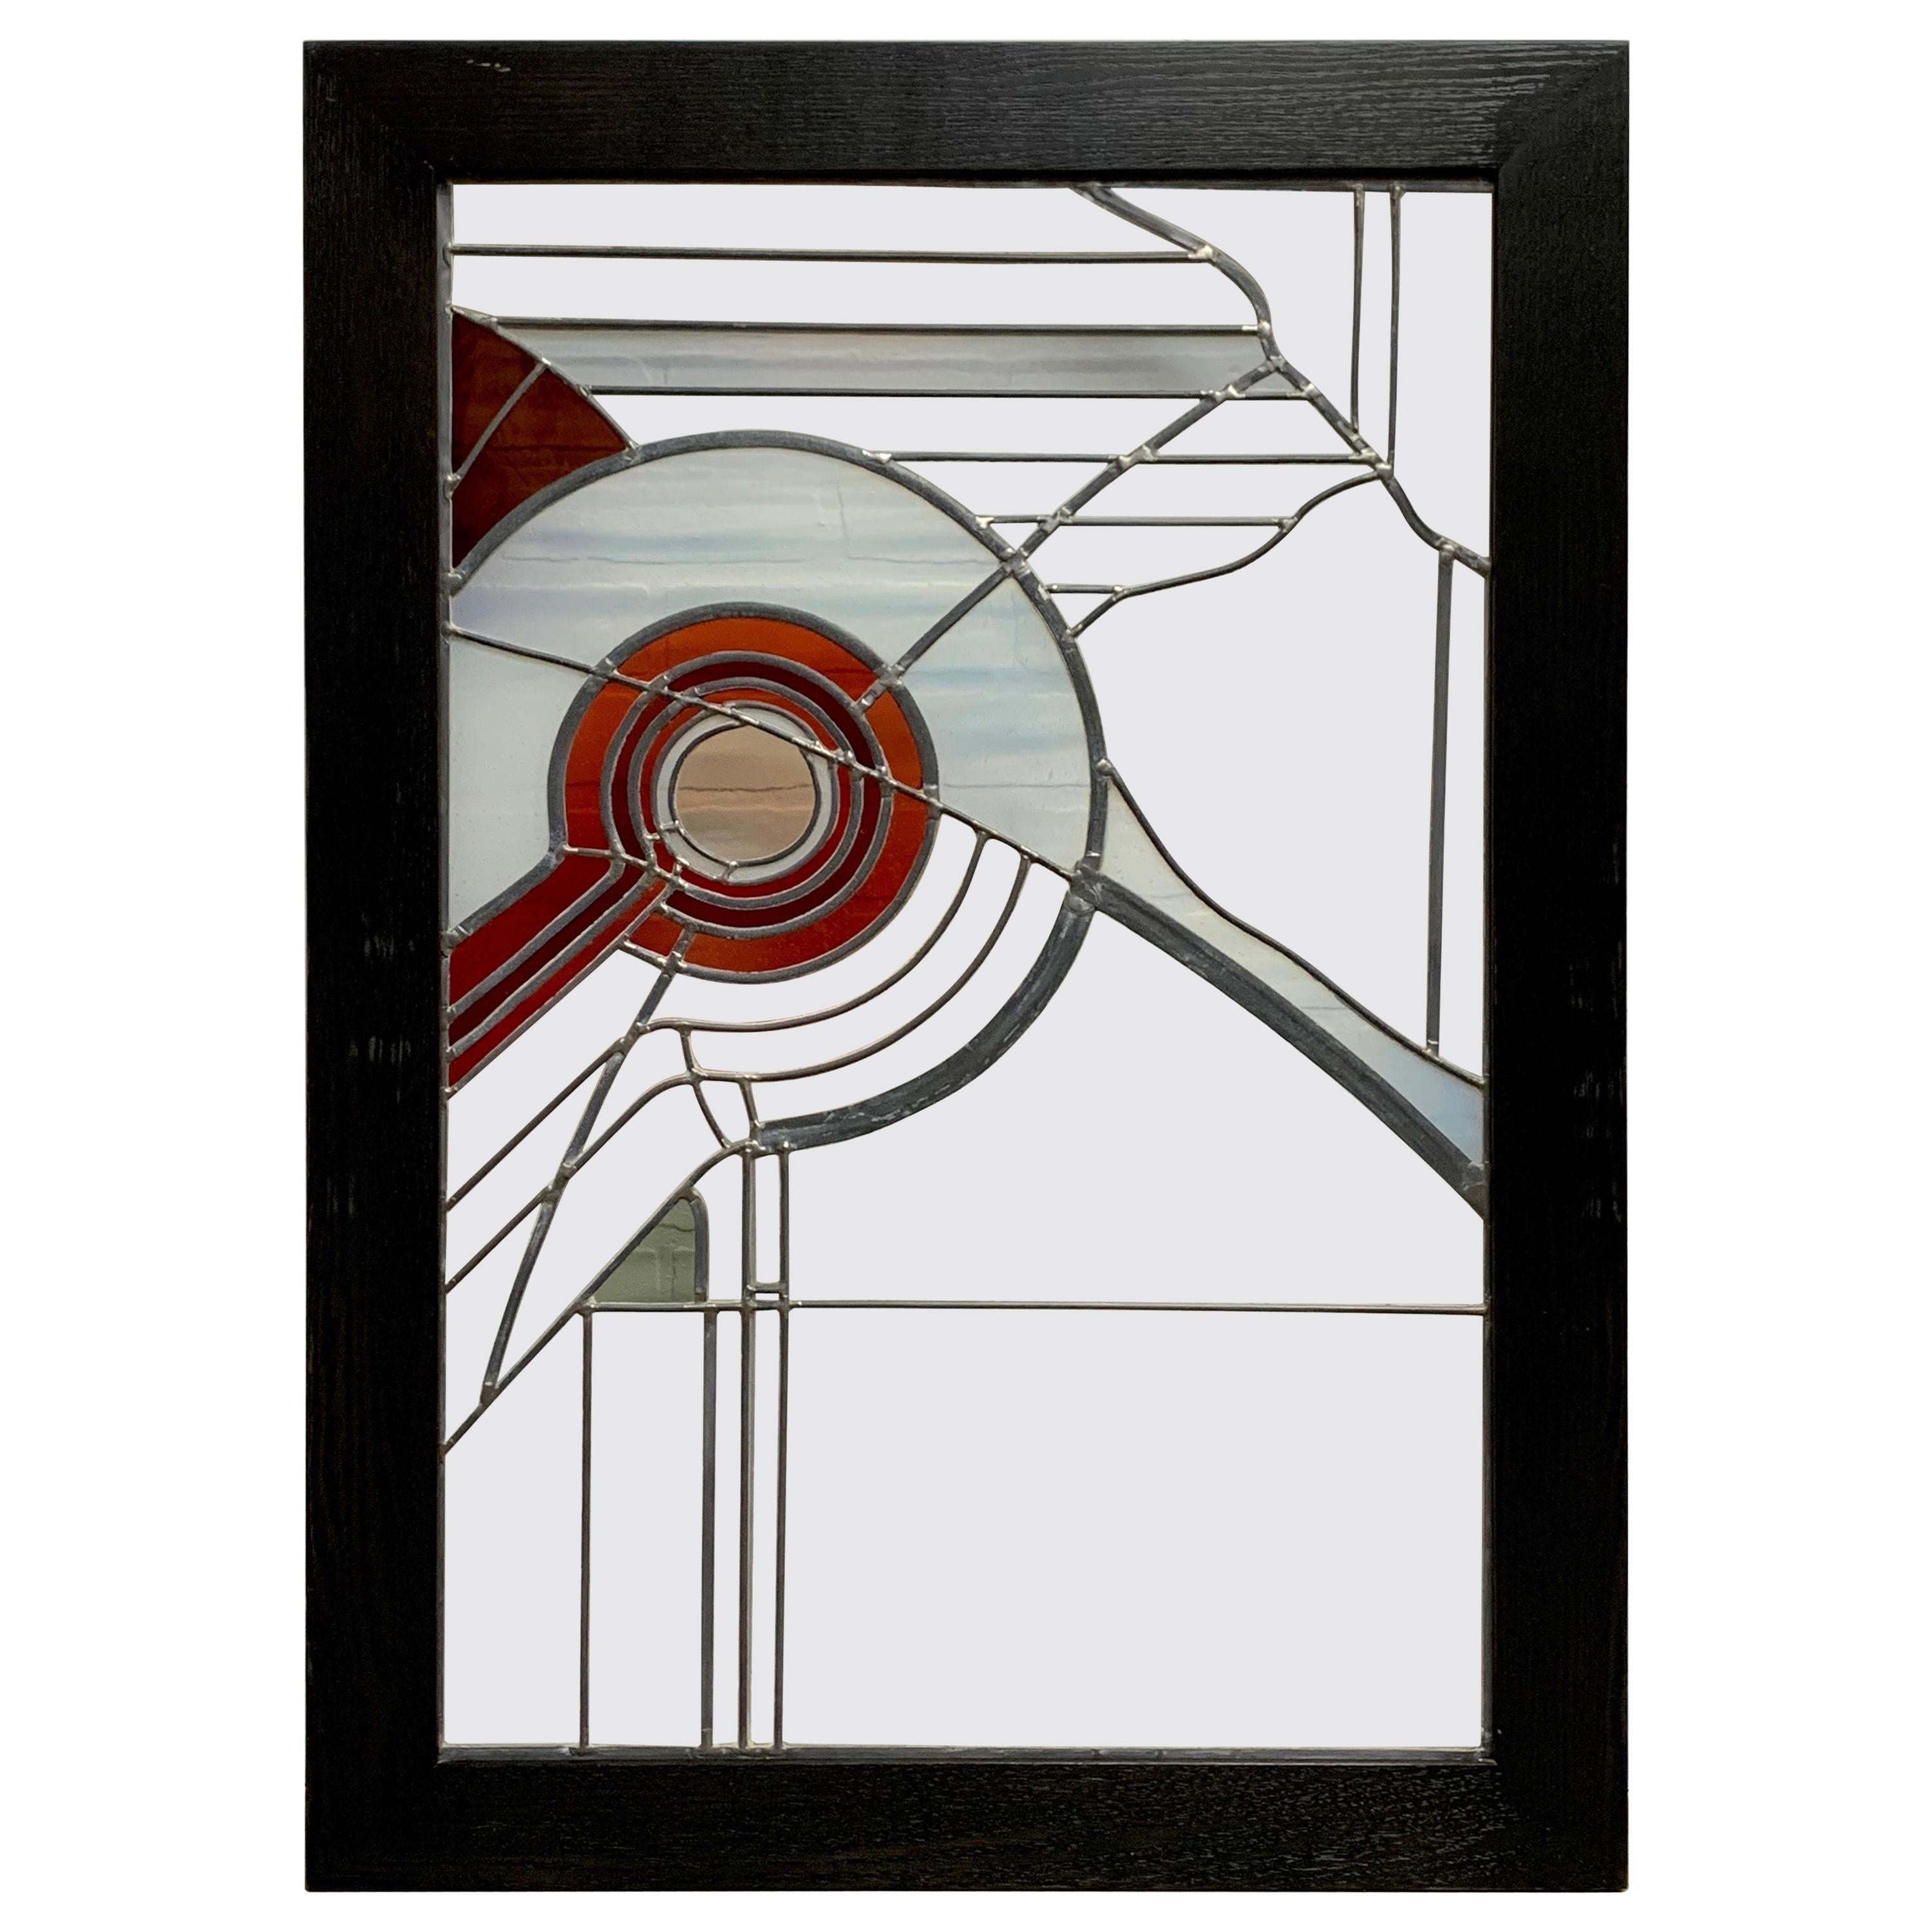 Abstract Leaded Glass Window